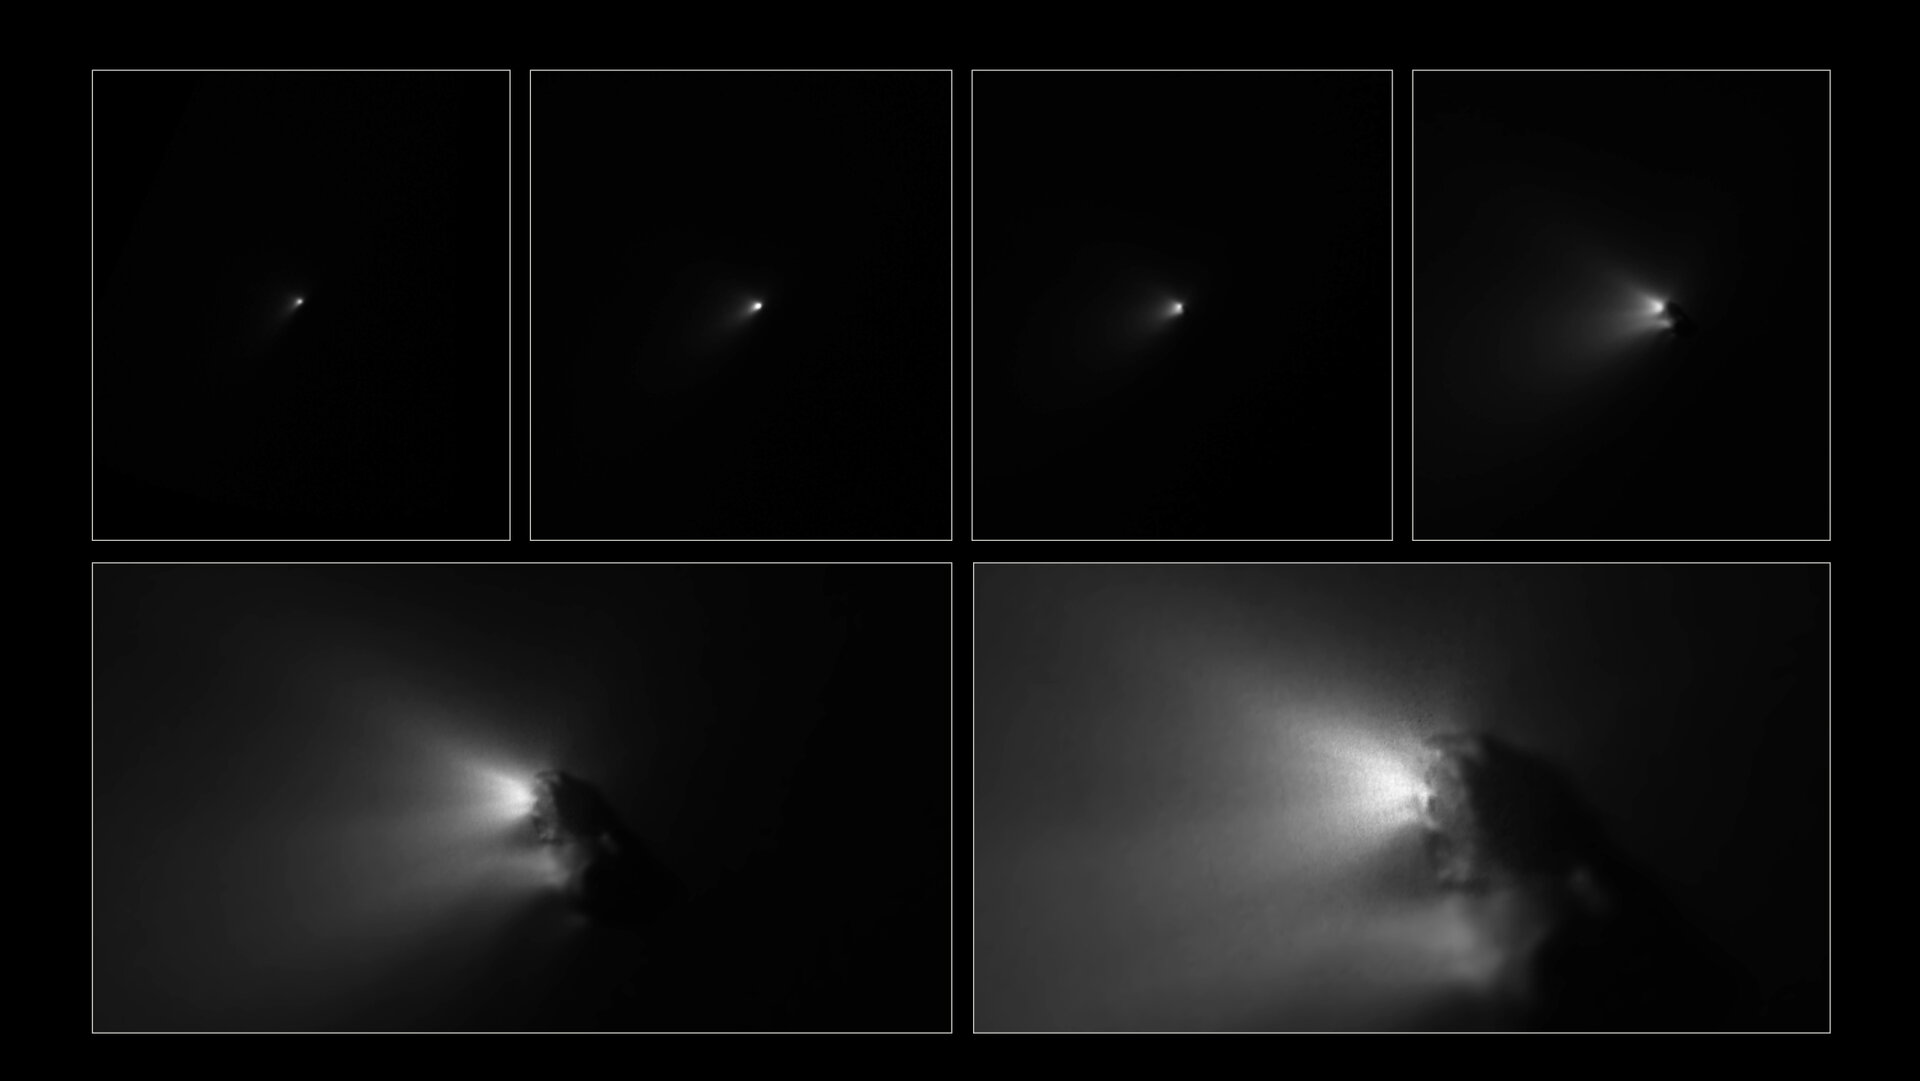 Giotto approaching Comet Halley